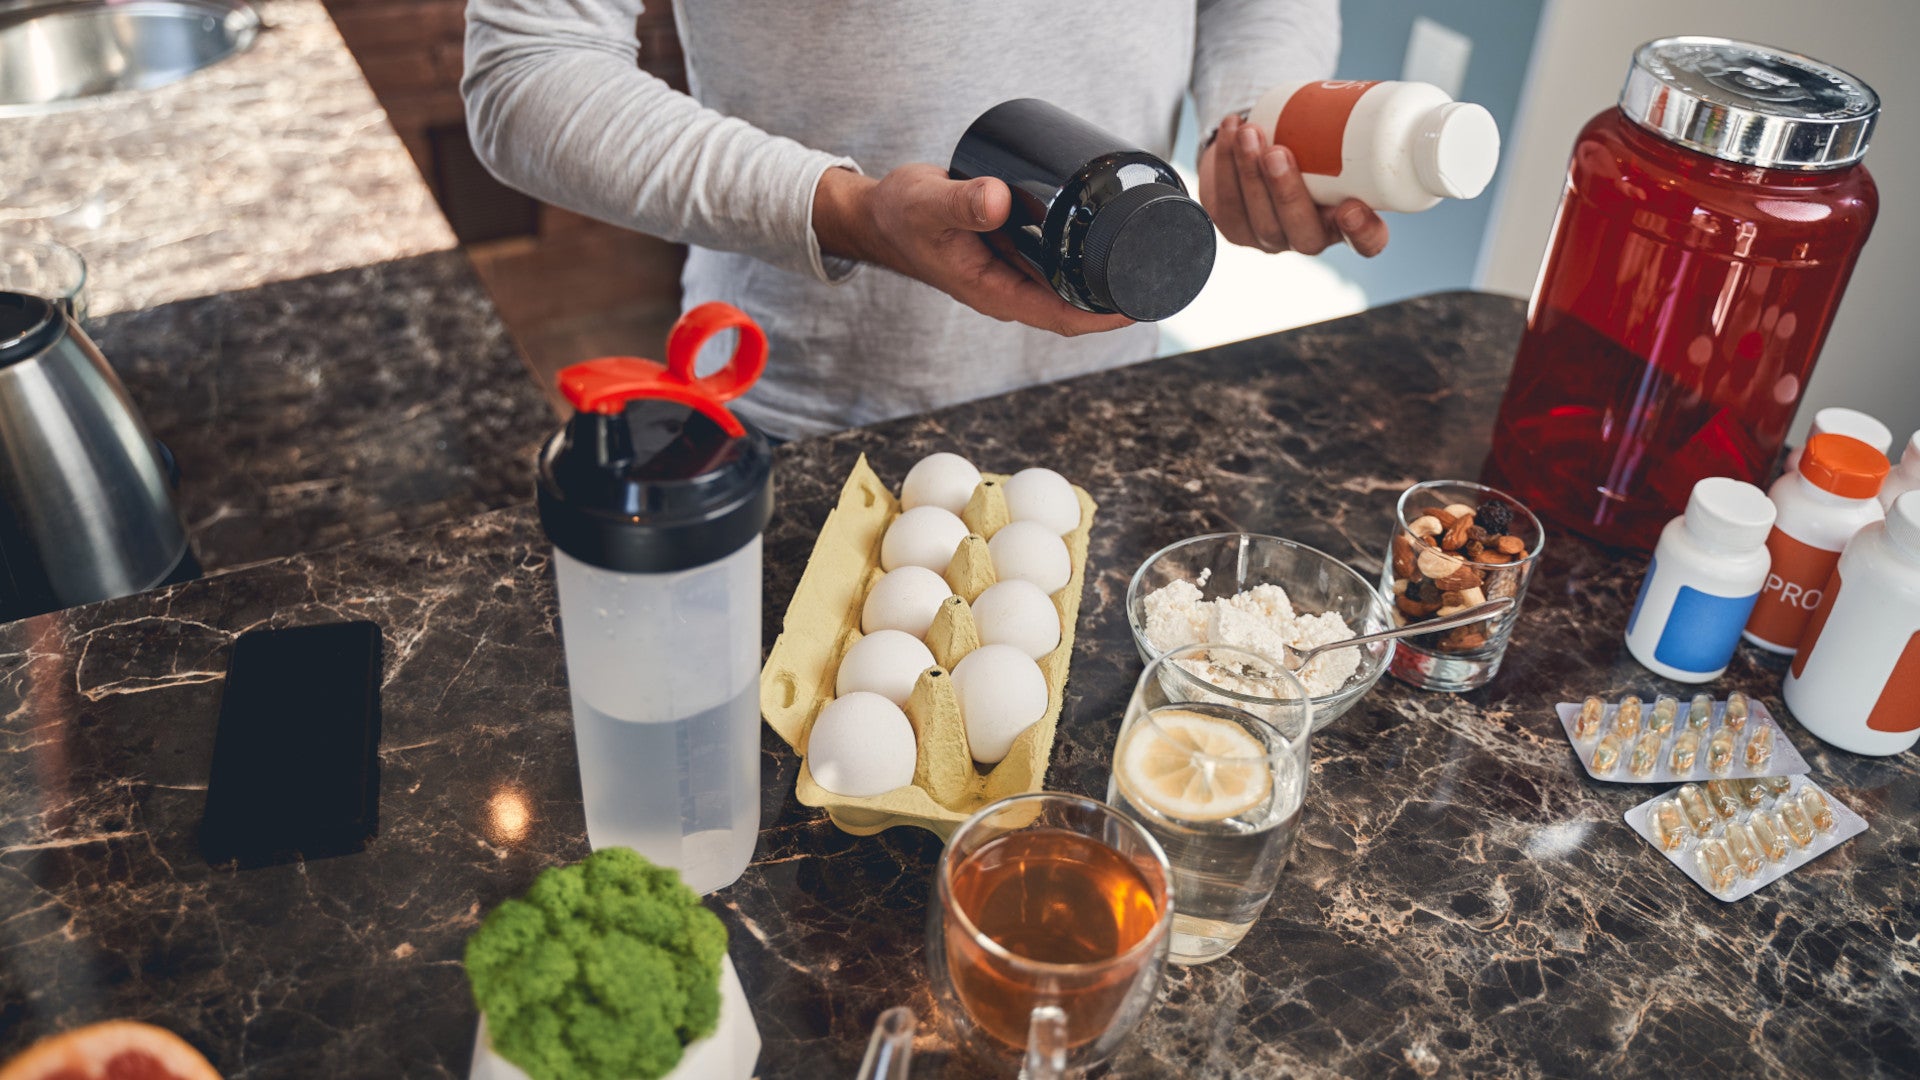 Protein Shake Bottle: Your Ultimate Guide